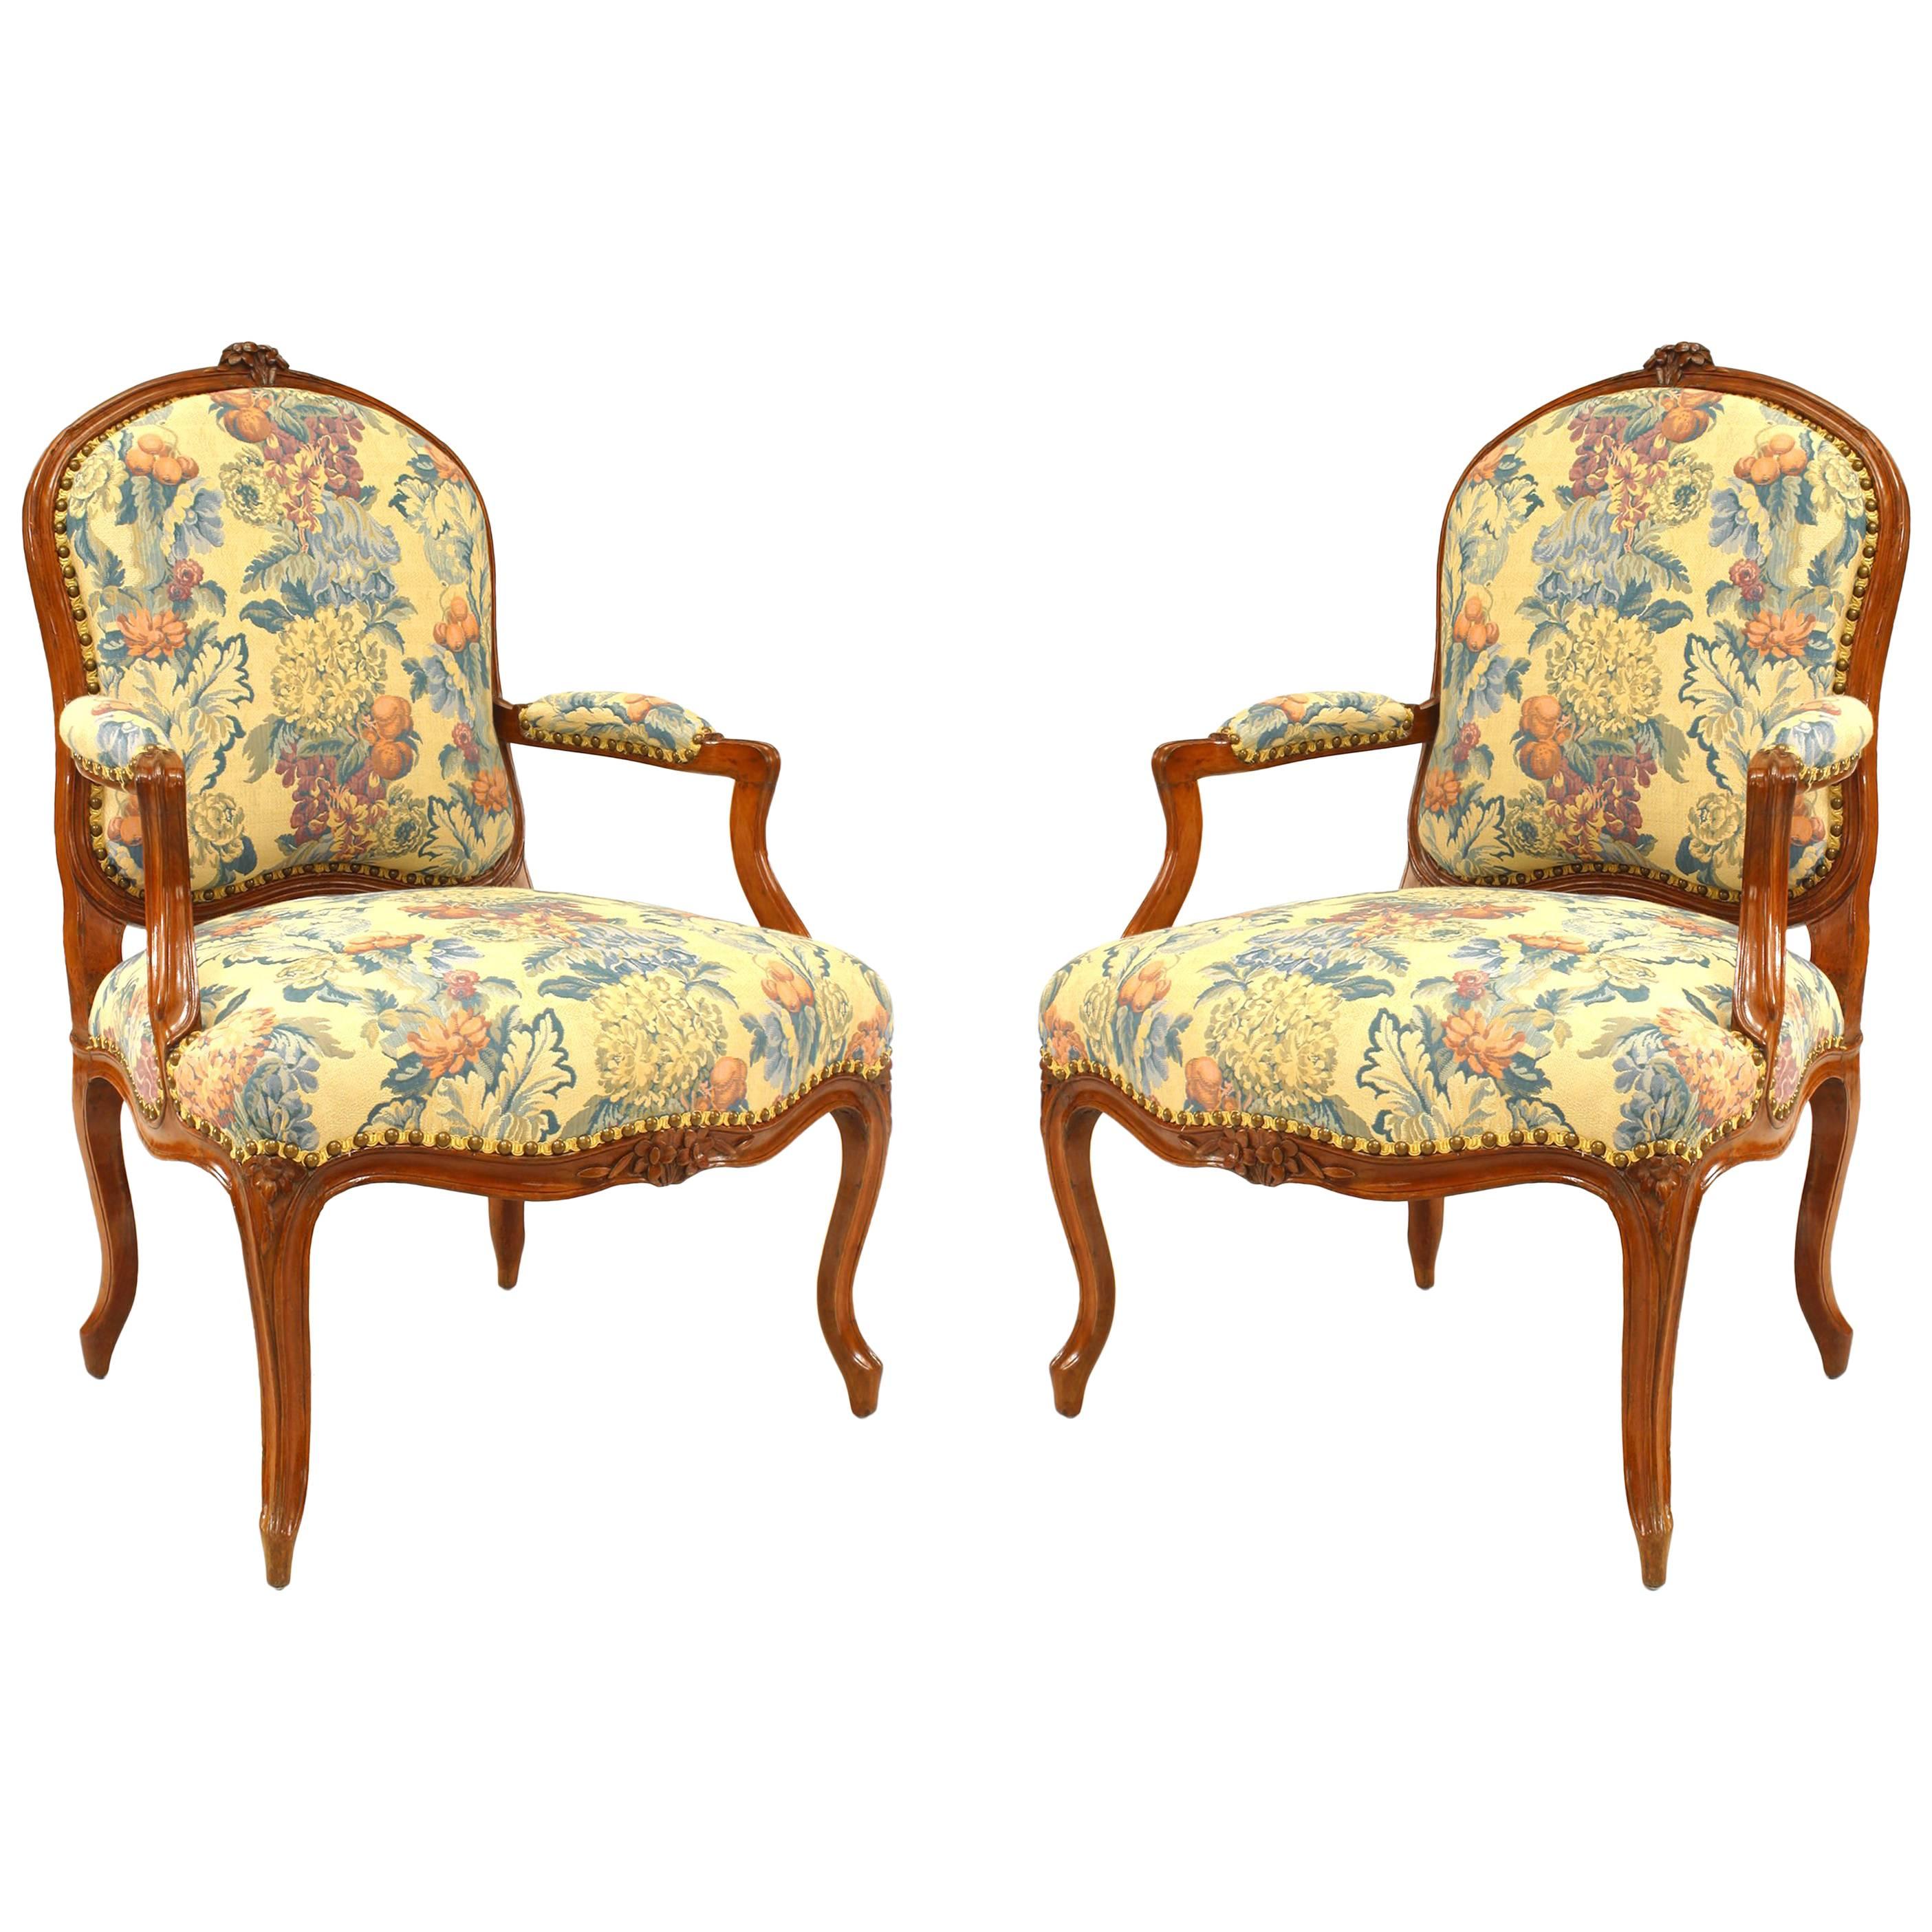 Pair of French Provincial Floral Armchairs